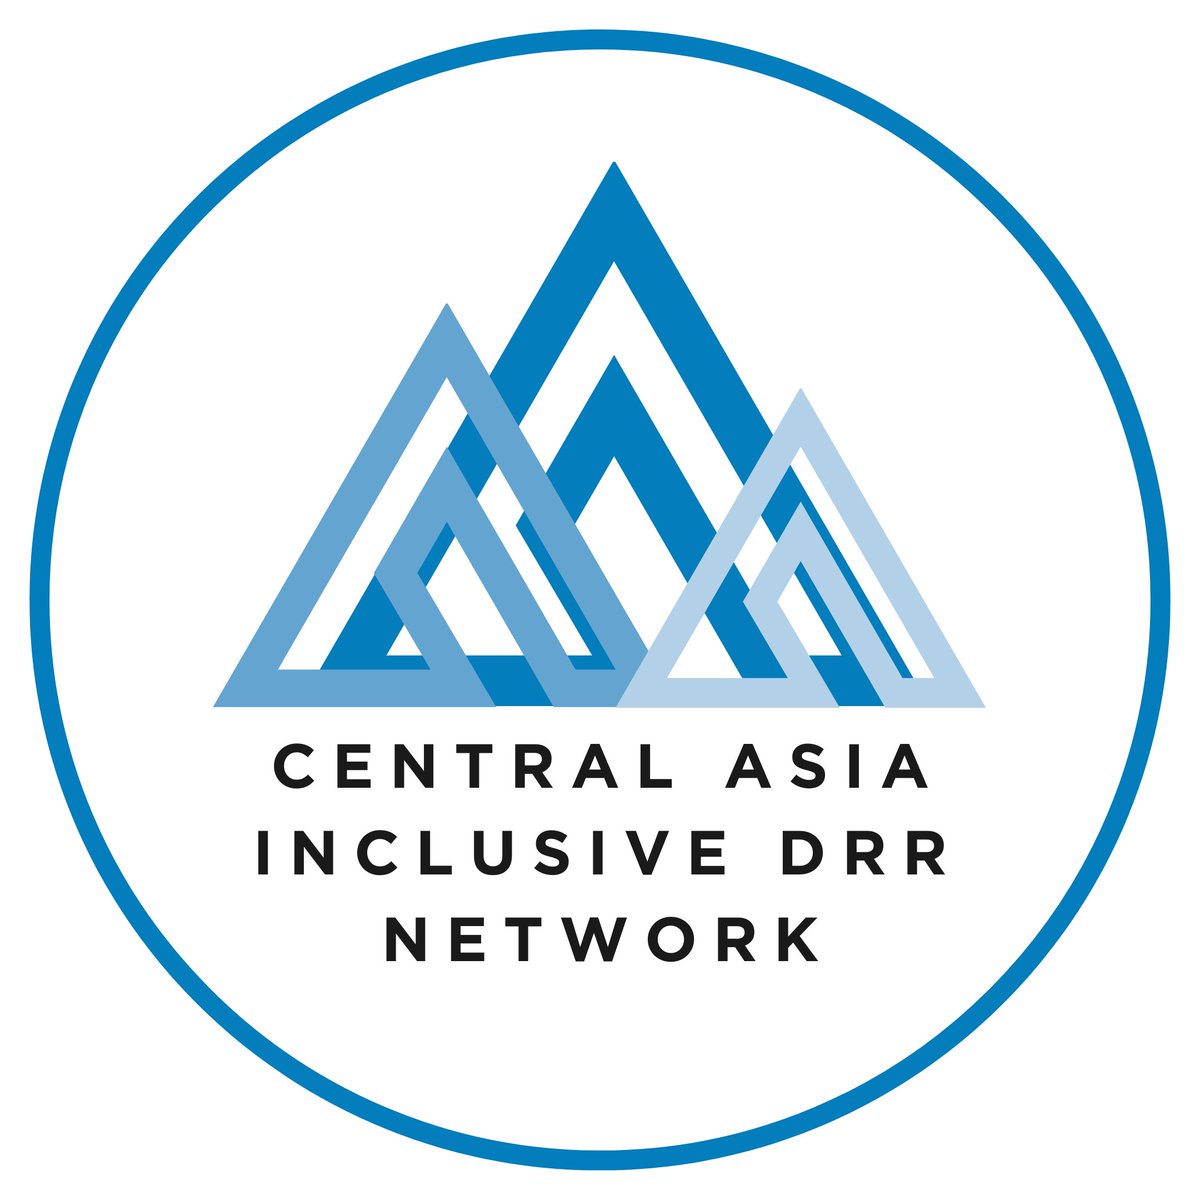 I'm excited to launch the Central Asia Inclusive DRR Network (CAIDRRN). 

Creating effective, equitable DRR strategies by uniting researchers, practitioners & communities for a better, more inclusive DRR. 

Interested? Sign up - bit.ly/CAIDRRN_signup

#InclusiveDRR